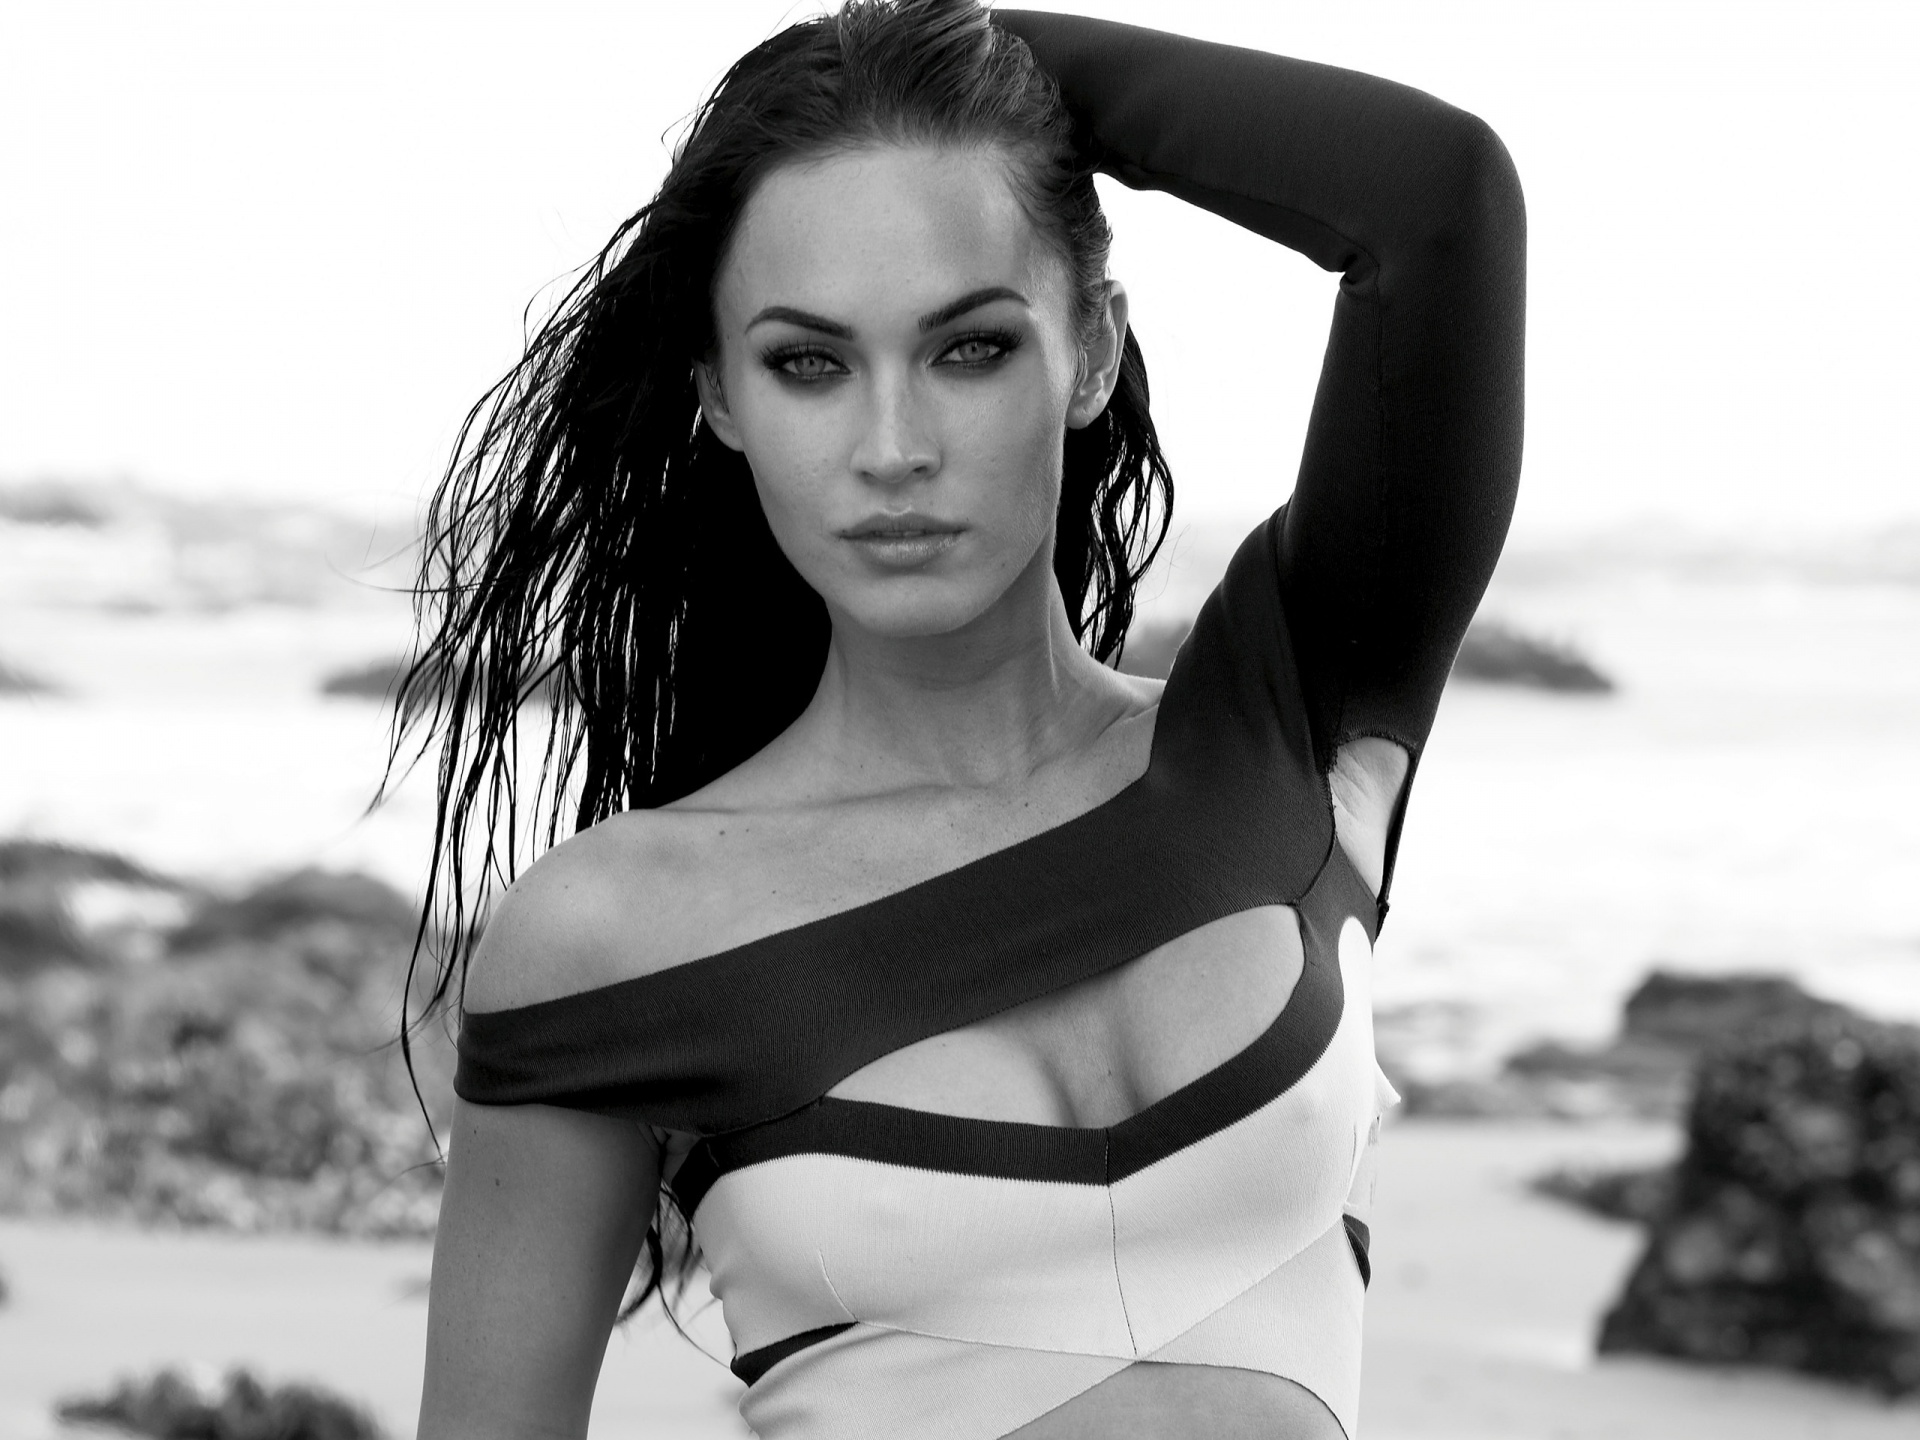 41 Hottest Bikini Pictures Of Megan Fox That Will Make You 